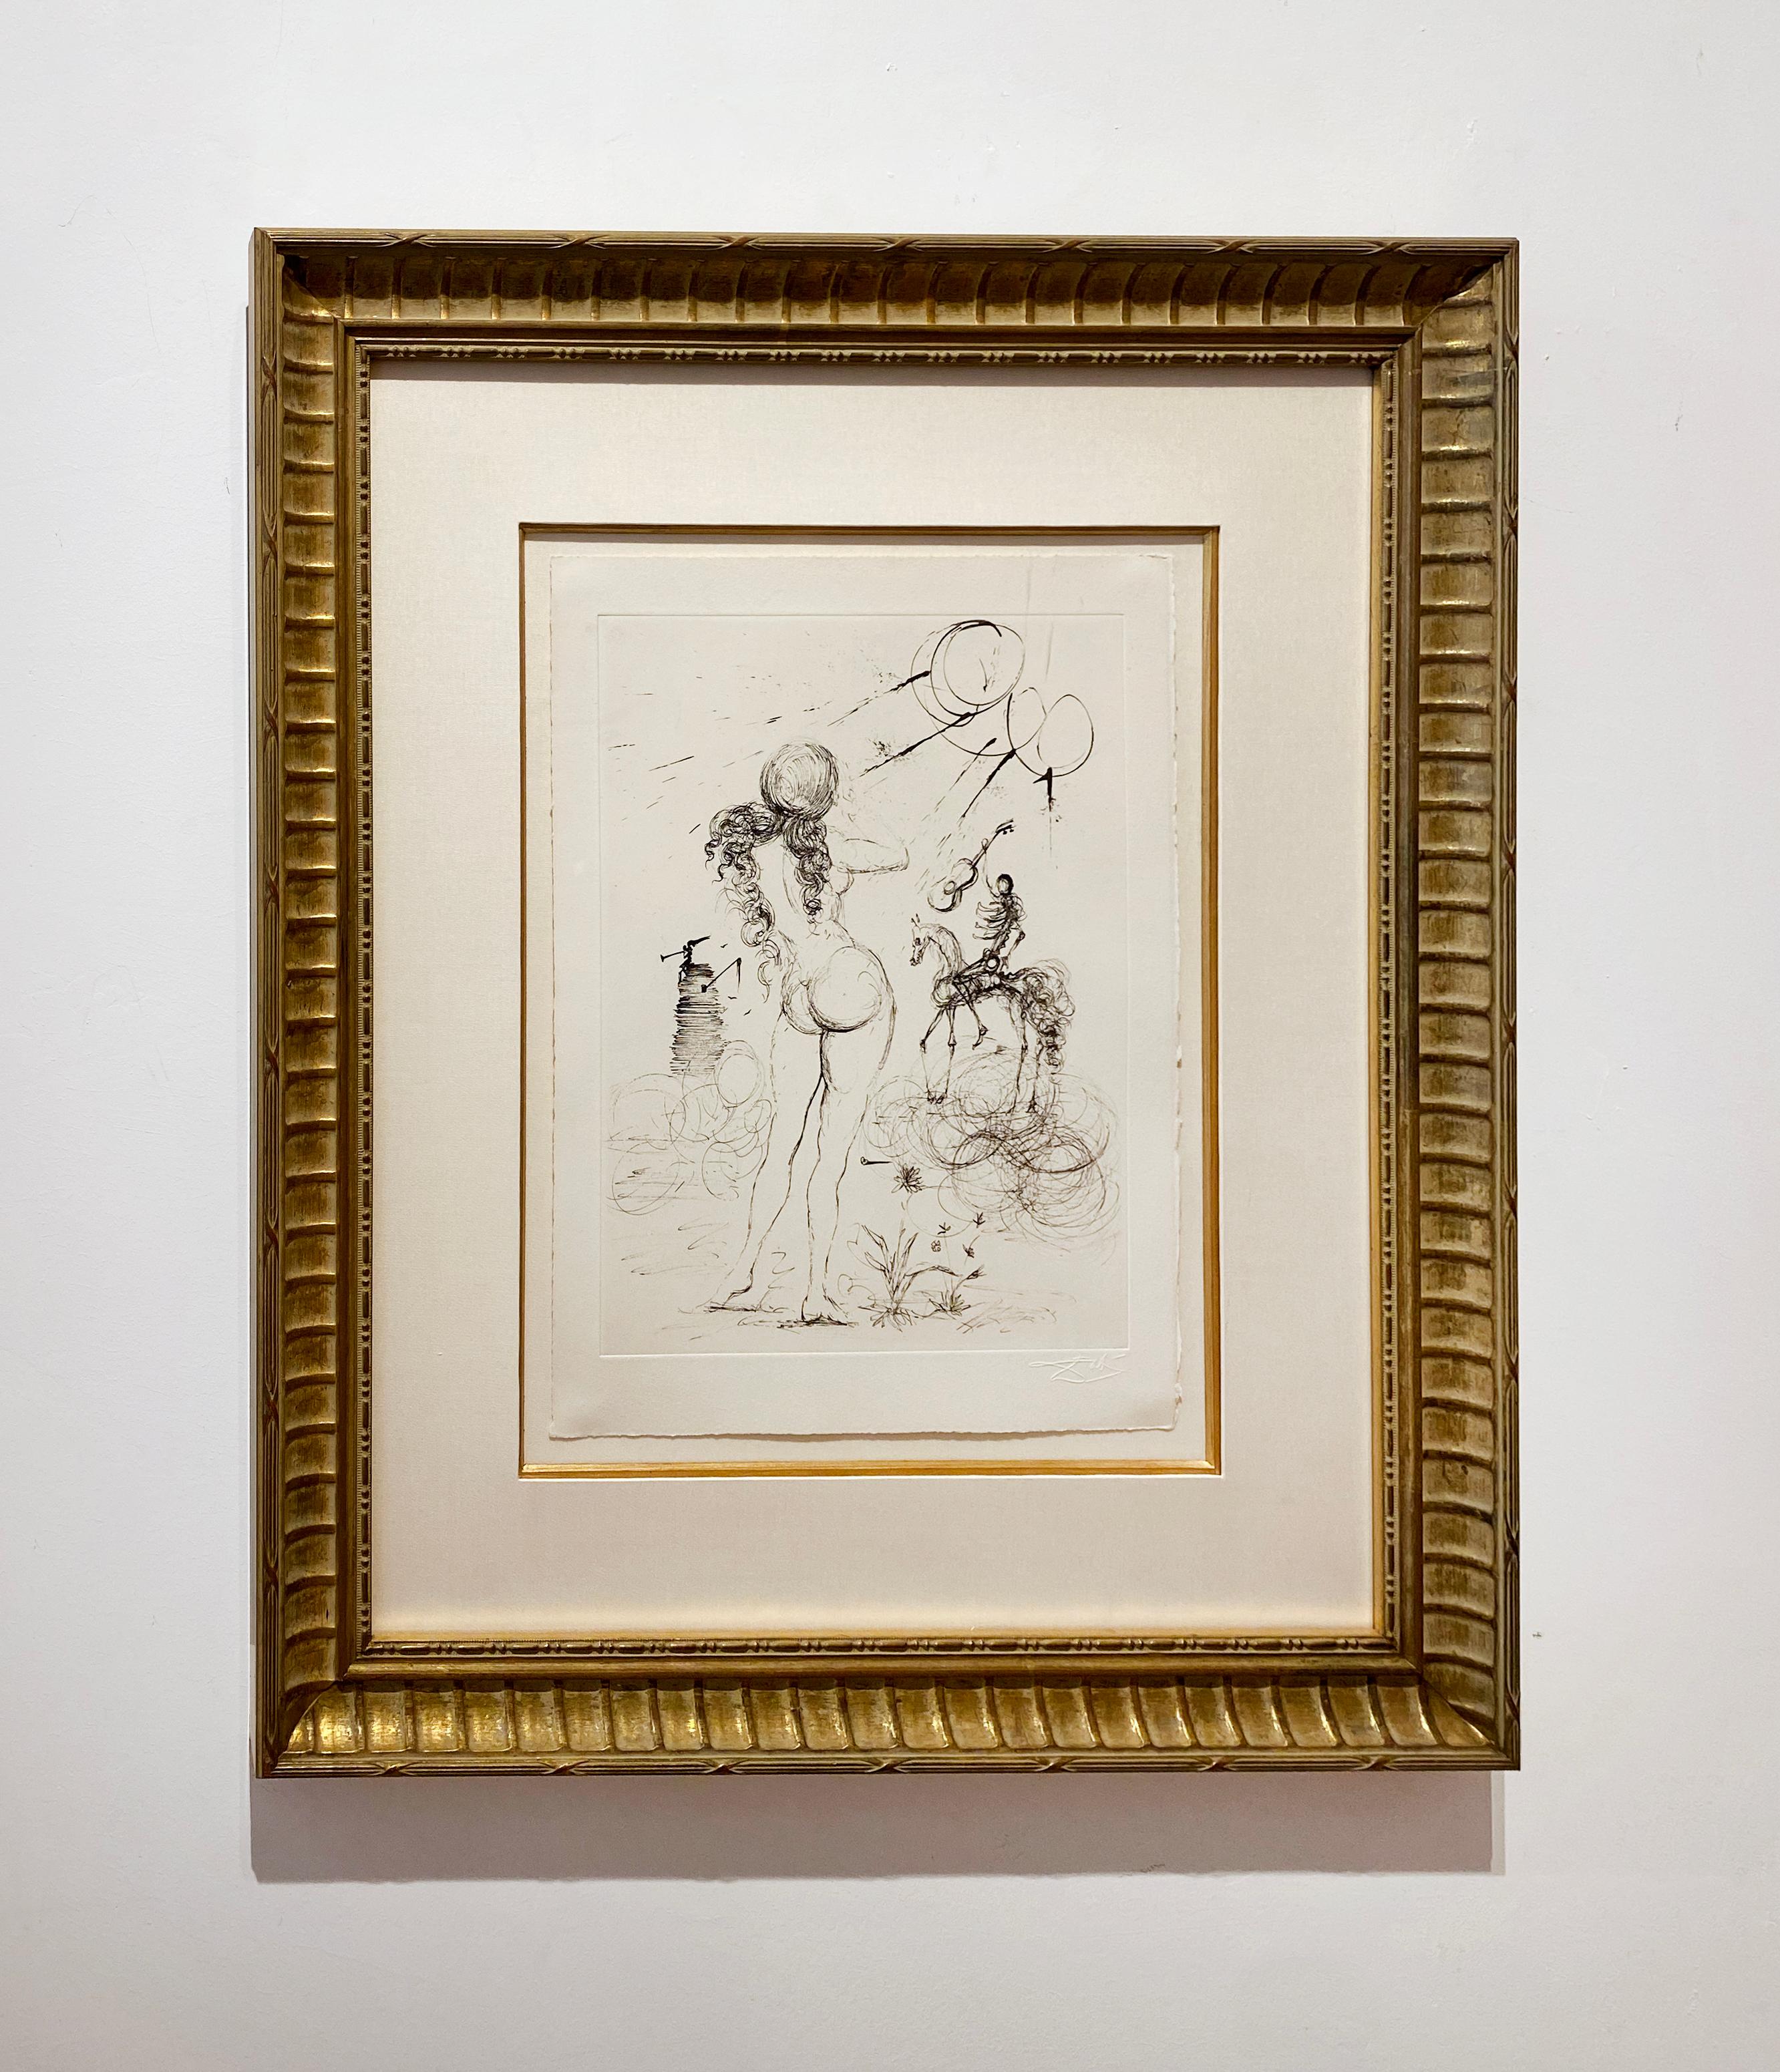 Nude, horse and death - Surrealist Print by Salvador Dalí